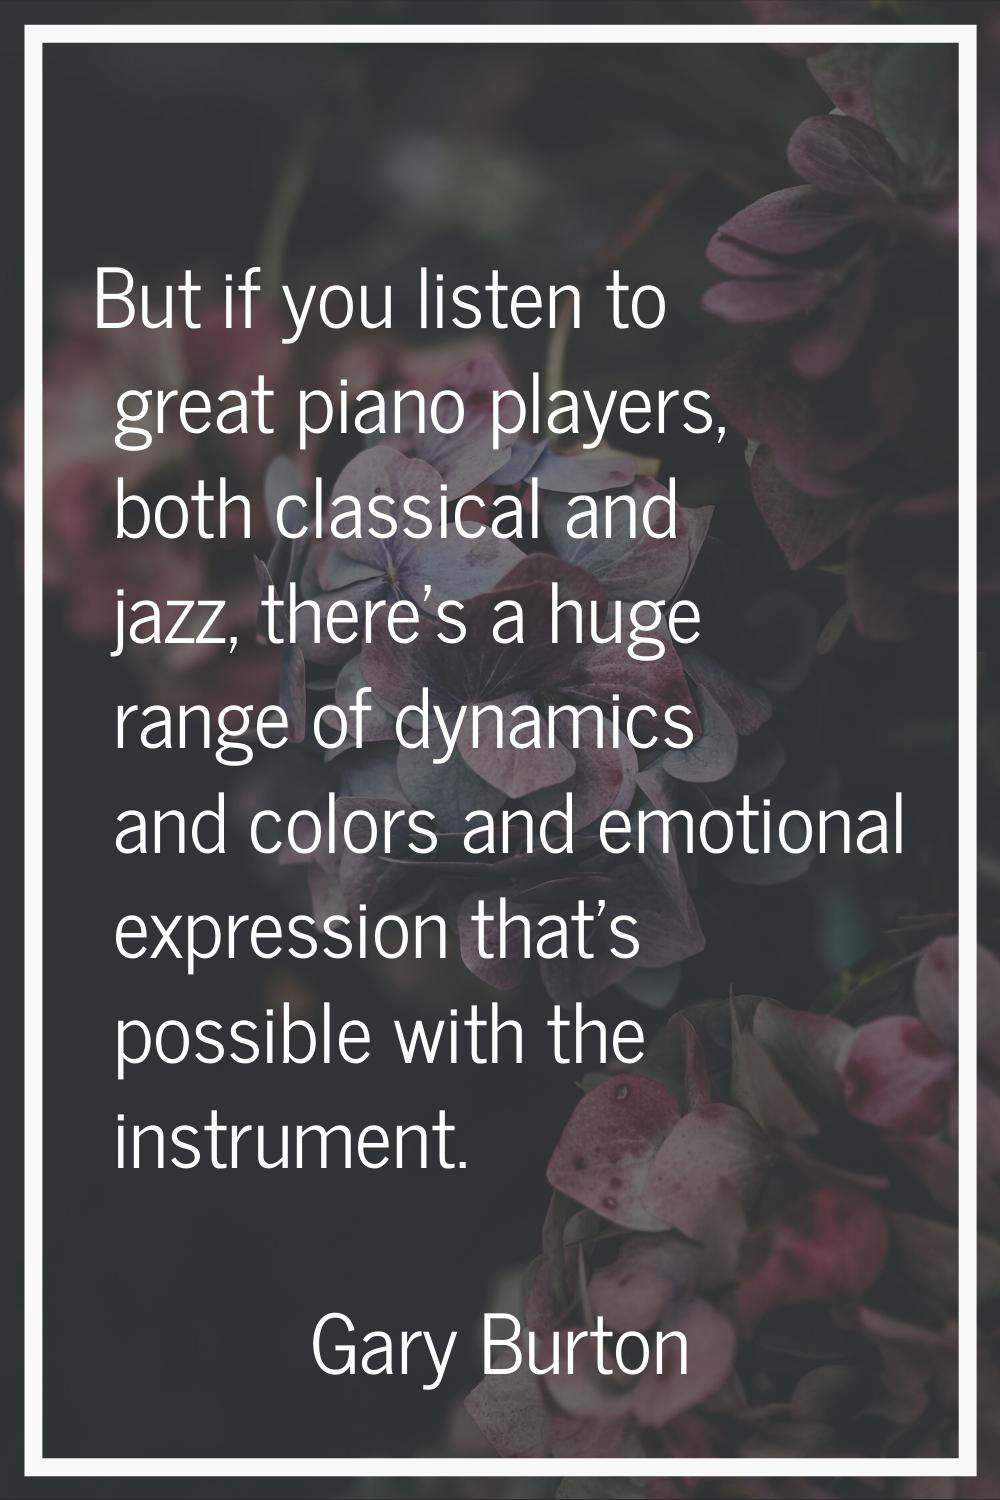 But if you listen to great piano players, both classical and jazz, there's a huge range of dynamics